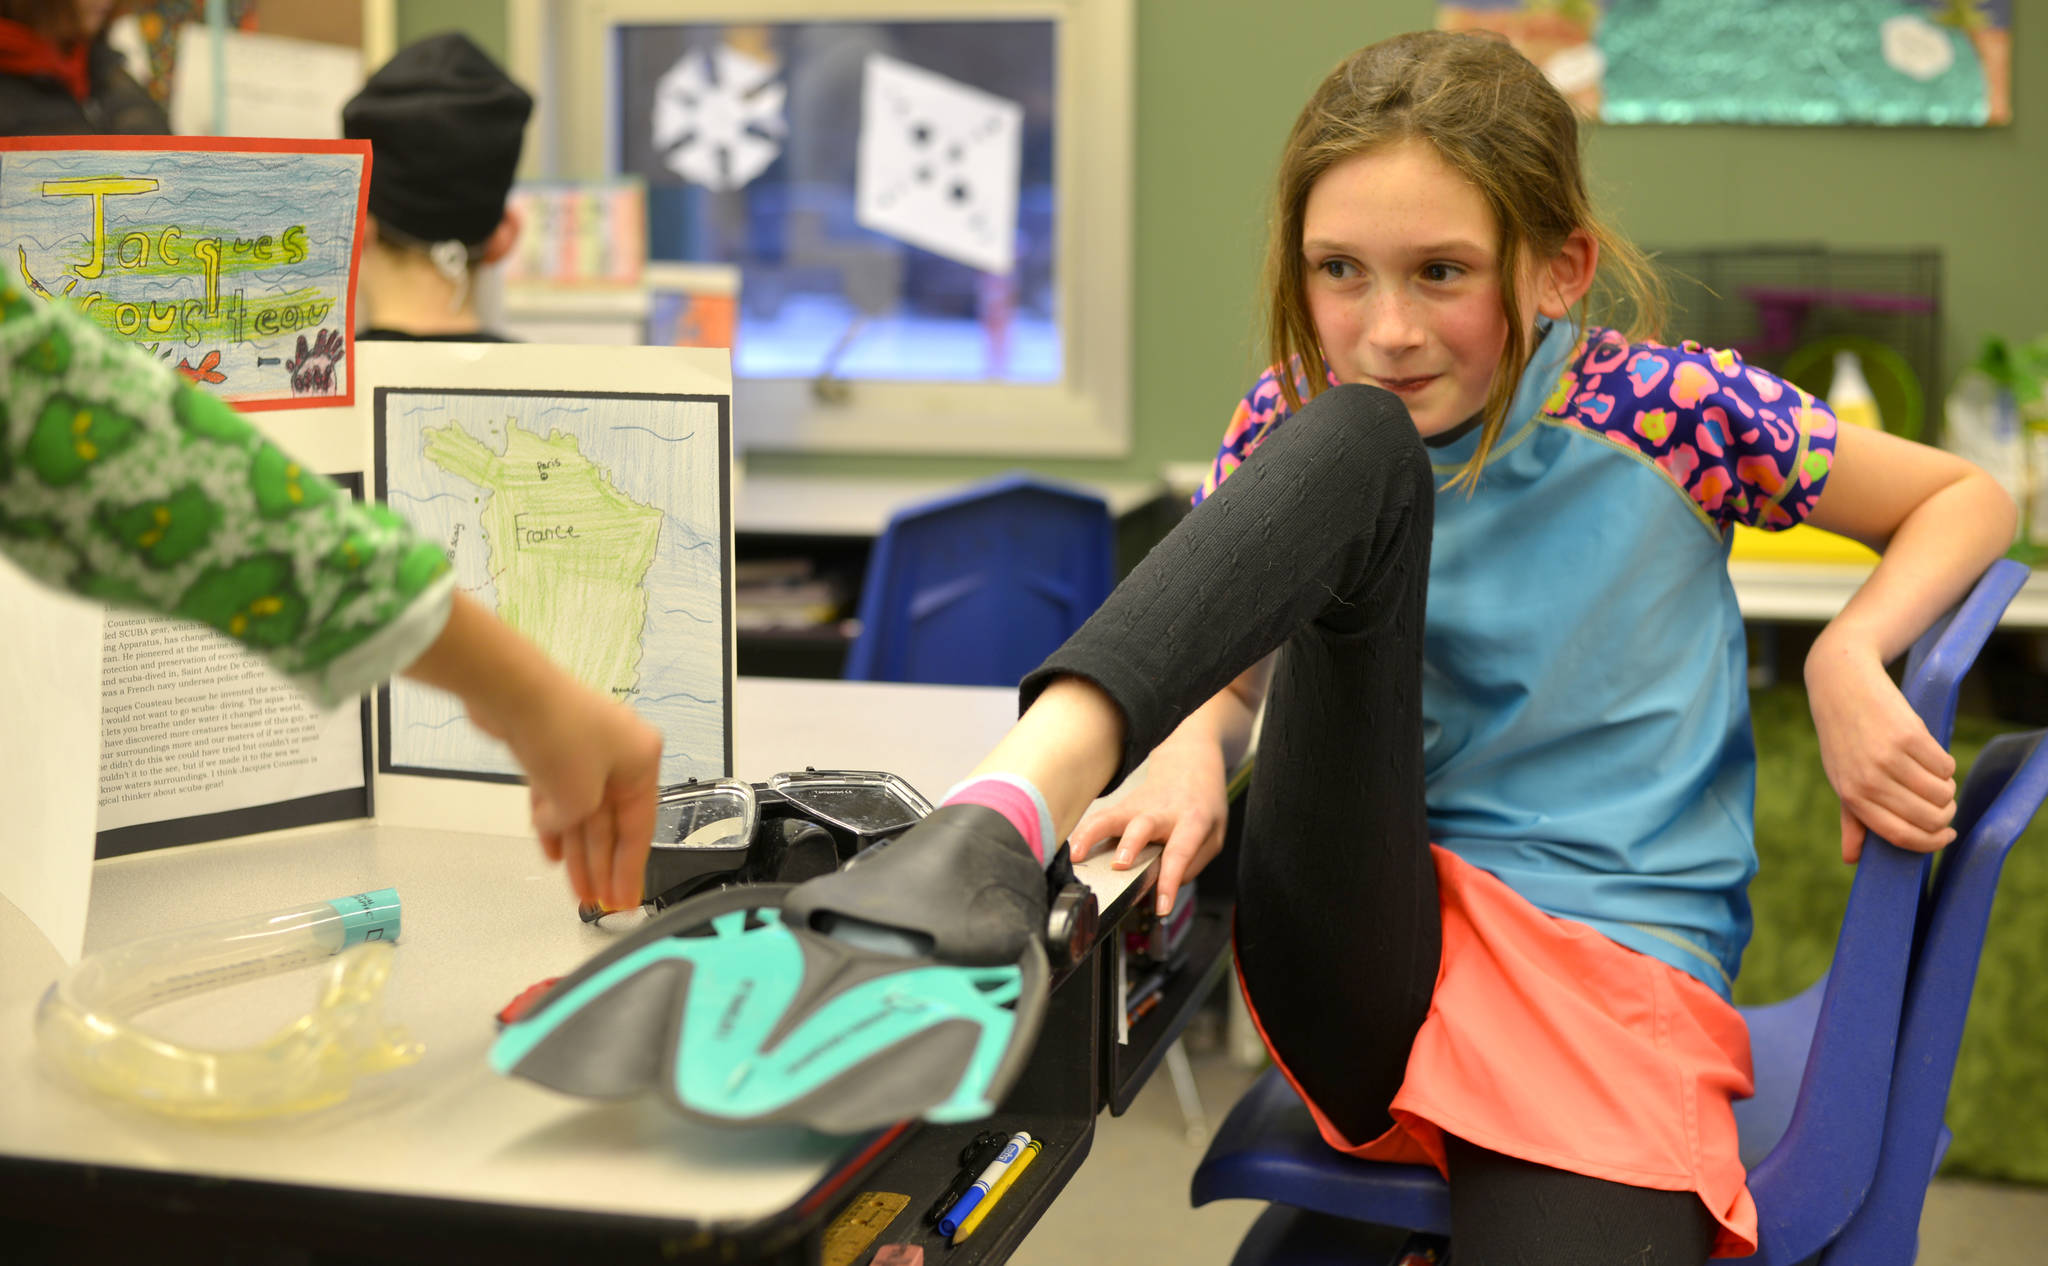 Kiya Hudson anticipates the pressing of her button during the Kaleidoscope School’s Wax Museum on Thursday, Dec. 7. 2017 in Kenai, Alaska, which tasked the fifth grade class with impersonating a notable historical figure and taking on their persona. When a visitor to the wax museum pushed a student’s button, they would recite their figure’s biographical information in first person. Hudson said she stepped into Jacques Cousteau’s flippers for the assignment because she wants to be a scuba diver when she grows up. (Photo by Kat Sorensen/Peninsula Clarion)